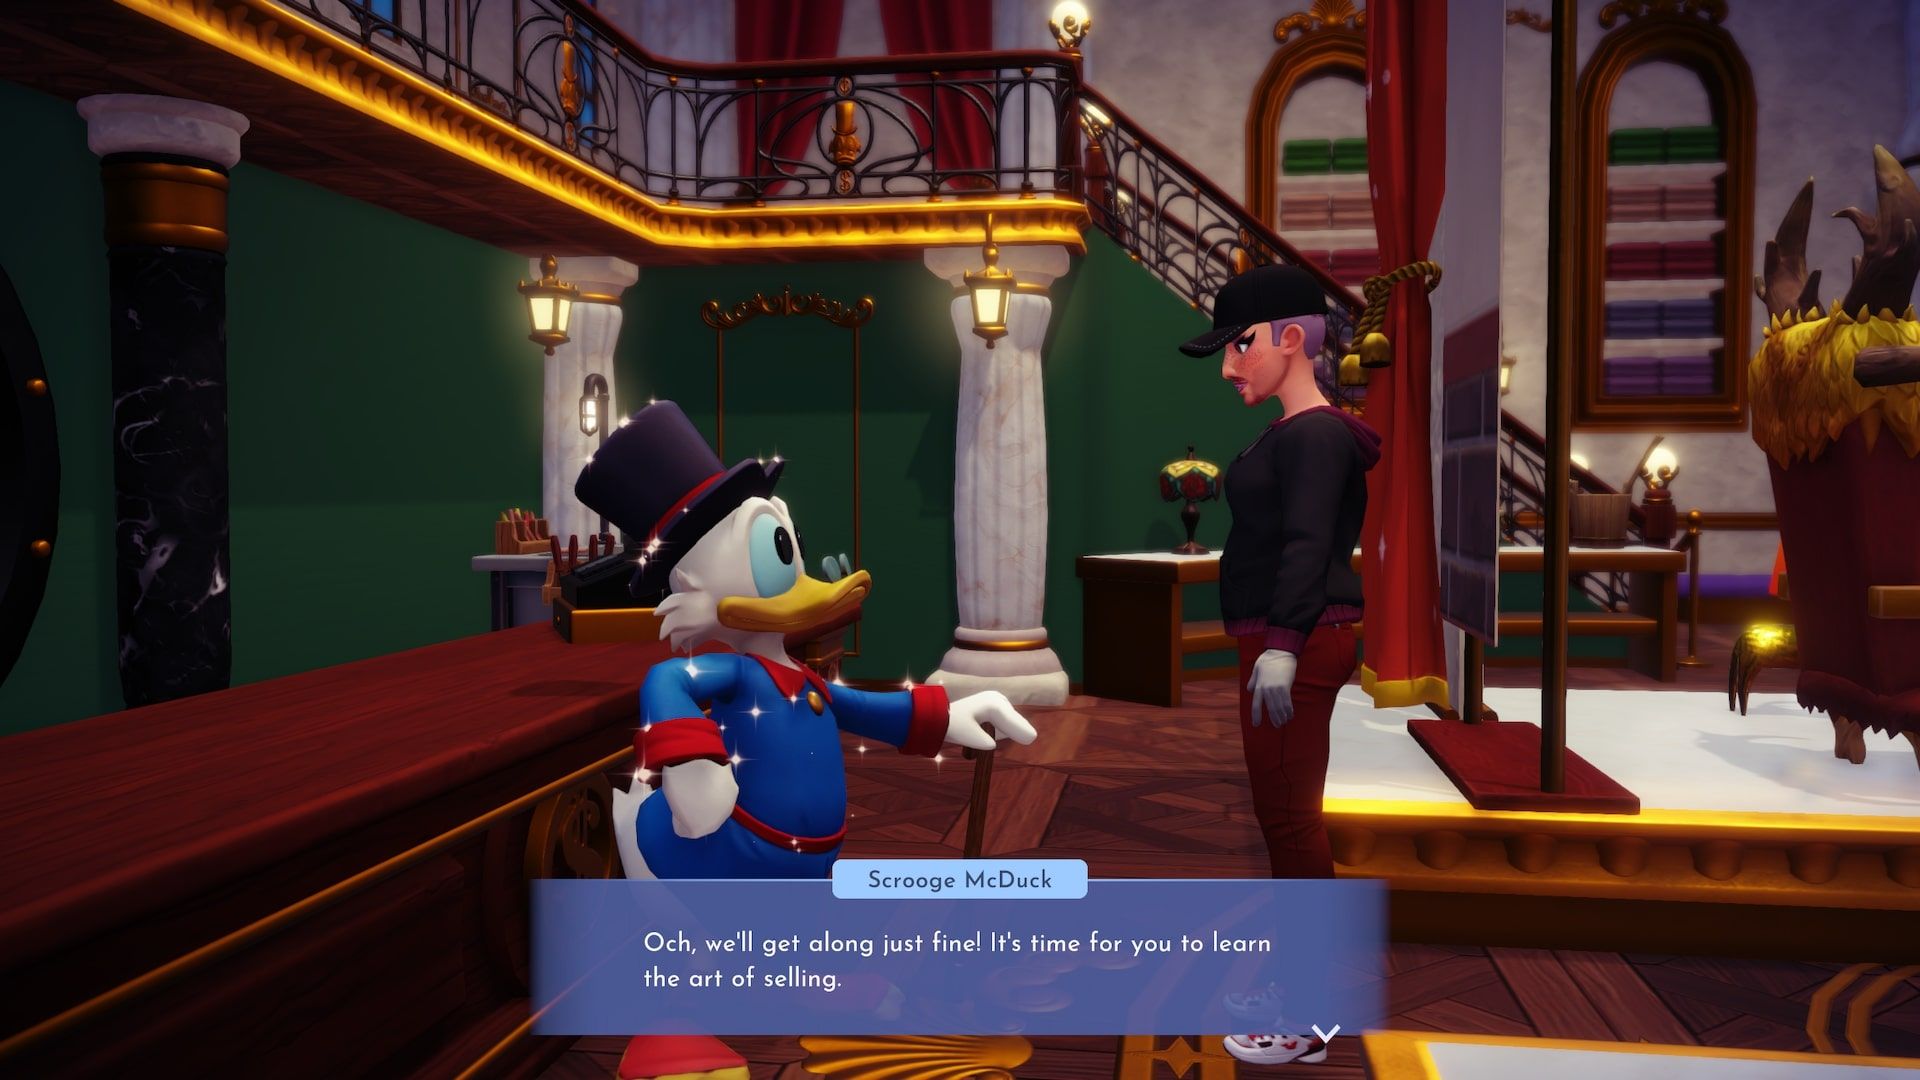 Disney Dreamlight Valley Scrooge McDuck talking to player about learning the art of selling